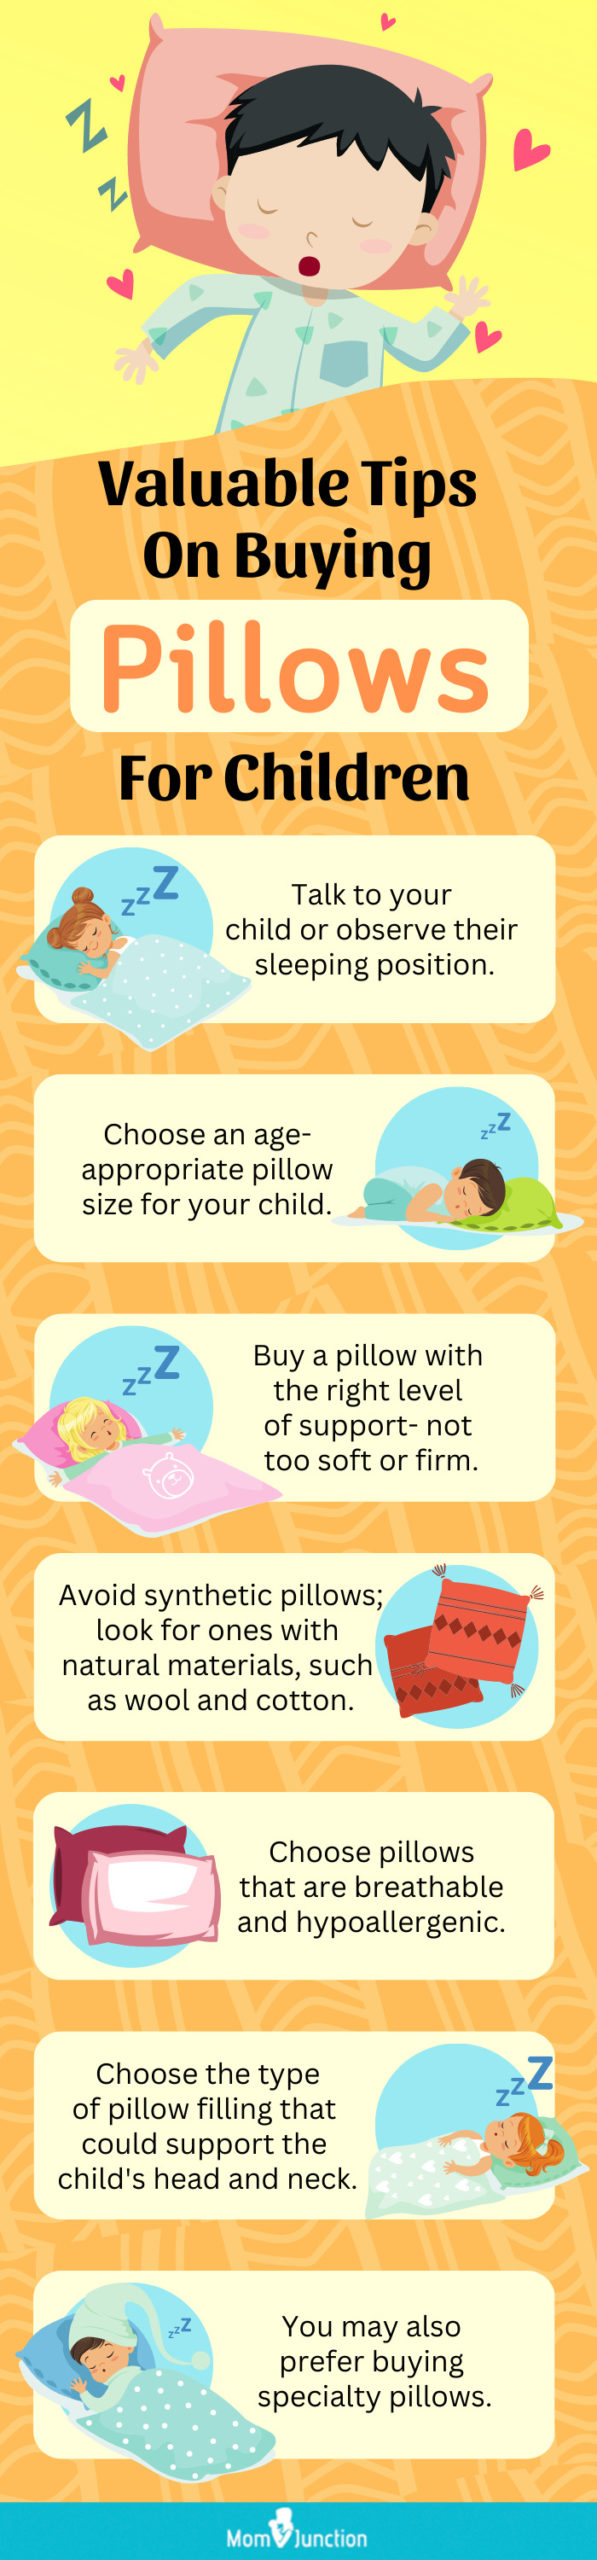 Valuable Tips on Buying Pillows for Children (infographic)